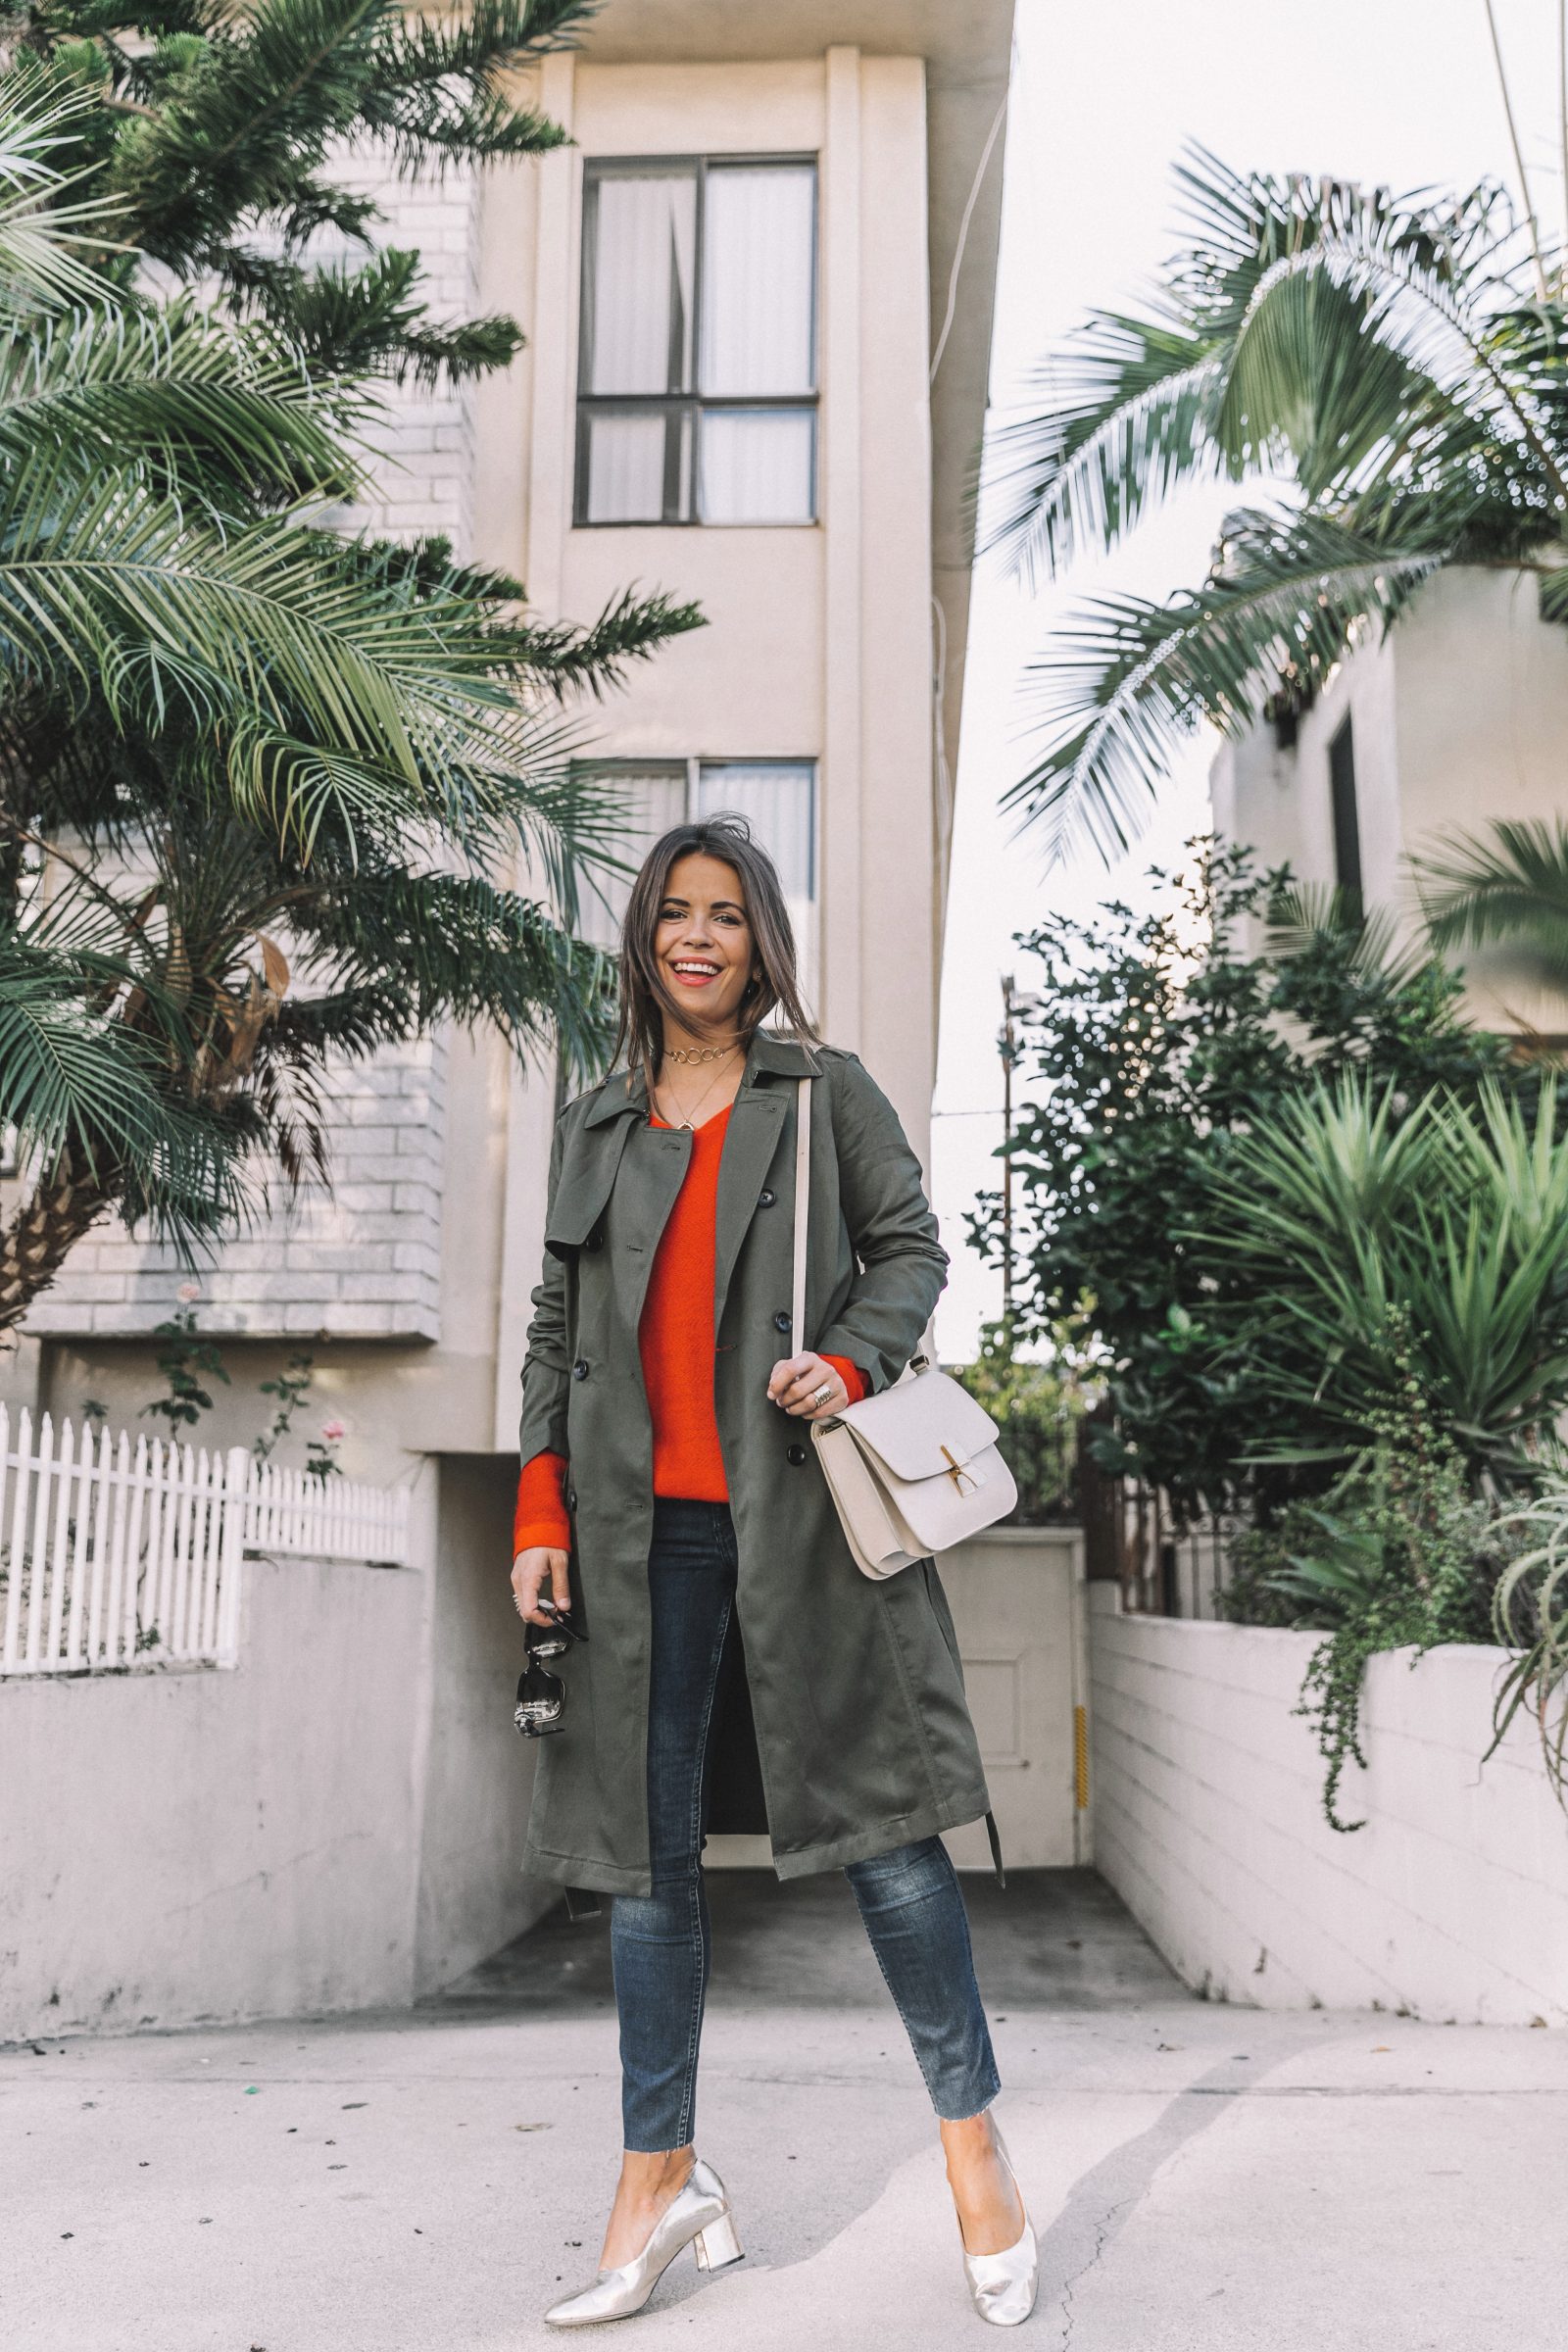 calvin_klein_outfit-ck_sculpted_jeans-denim-trench-orange_sweater-gold_shoes-celine_box_bag-outfit-street_style-los_angeles-collage_vintage-39